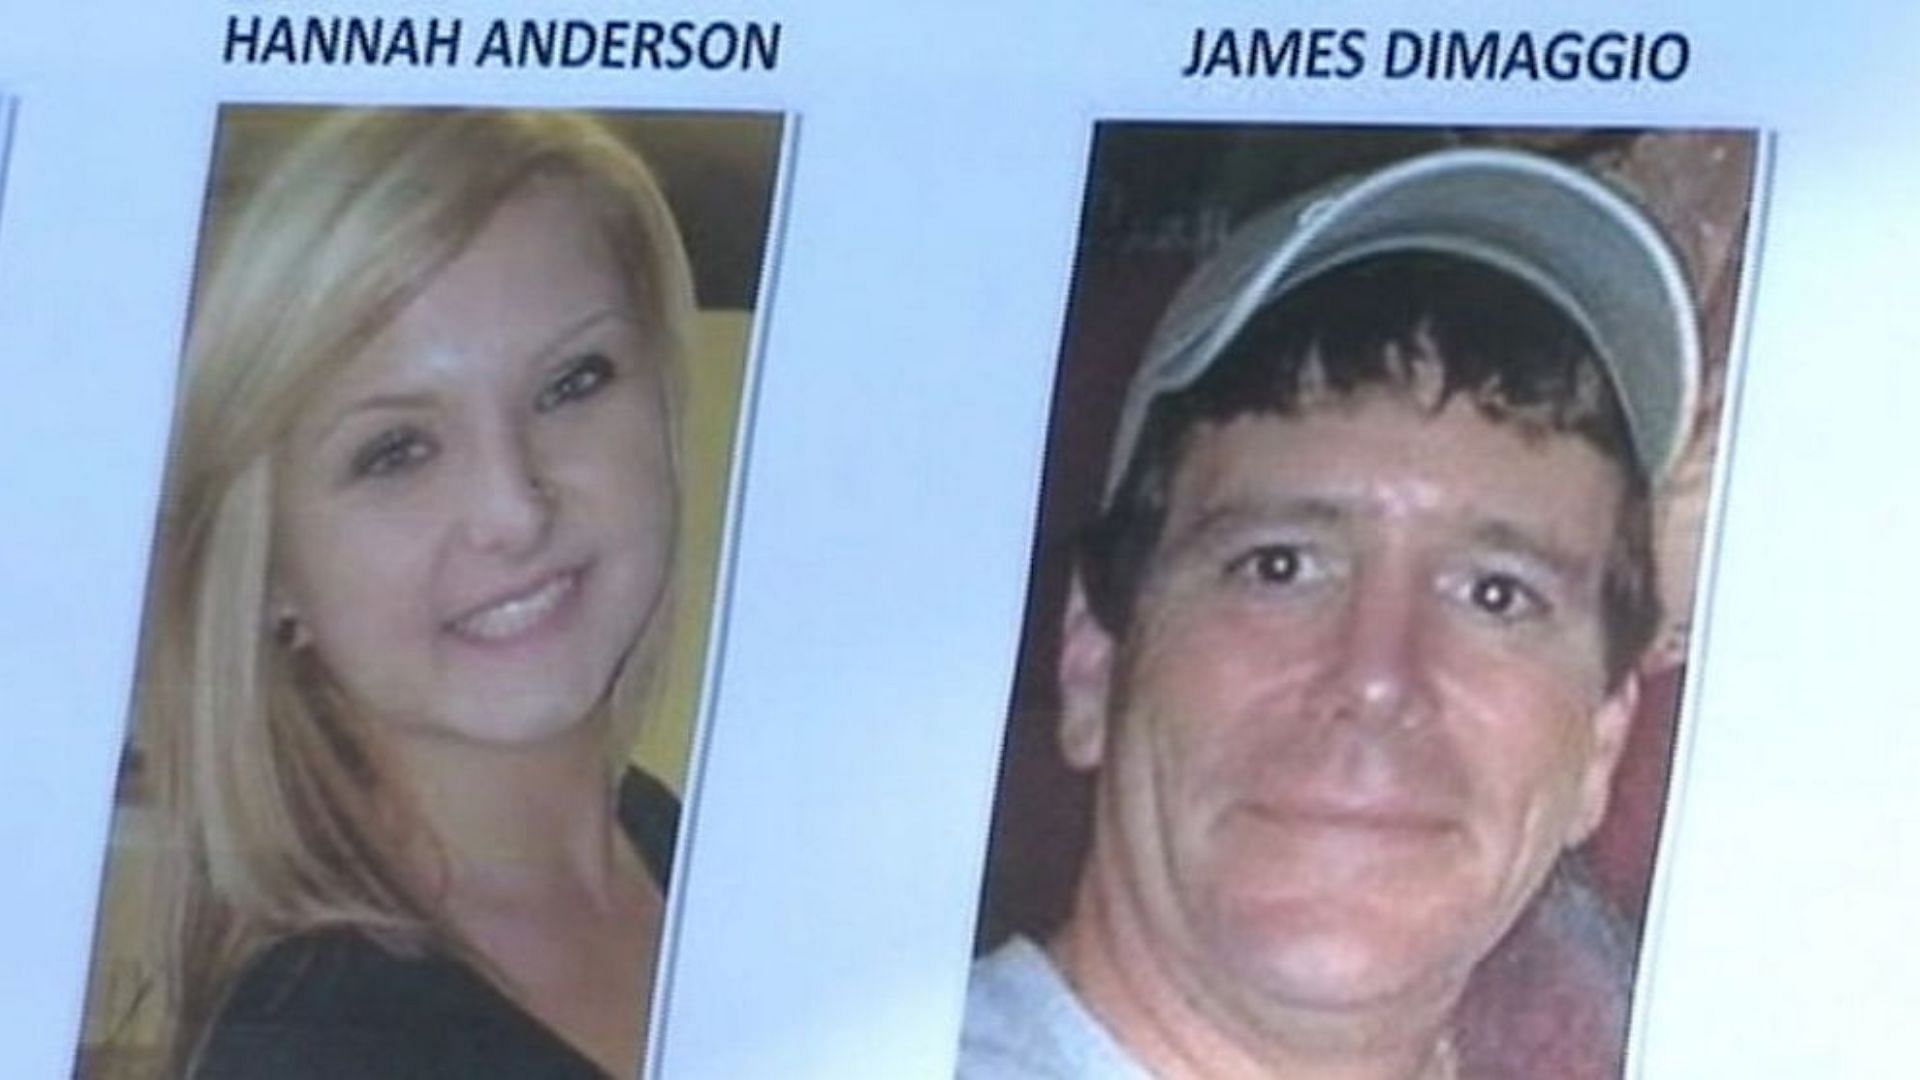 James DiMaggio was the alleged kidnapper of Hannah Anderson in the 2013 kidnapping case that shocked the world (Image via ABC)